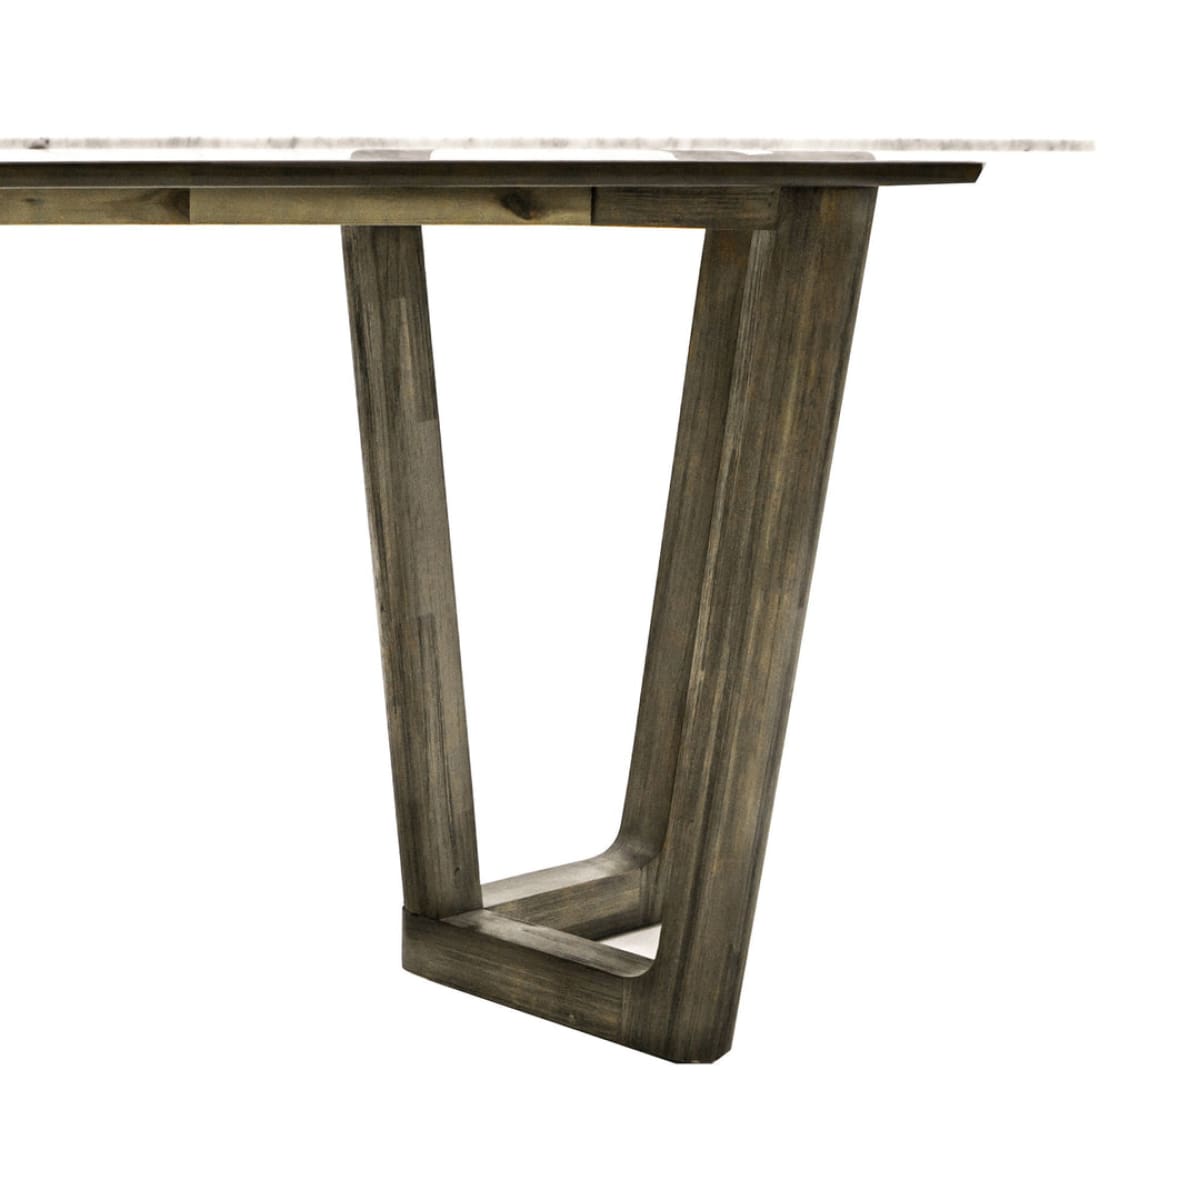 Aura Dining Table 71 - lh-import-dining-tables